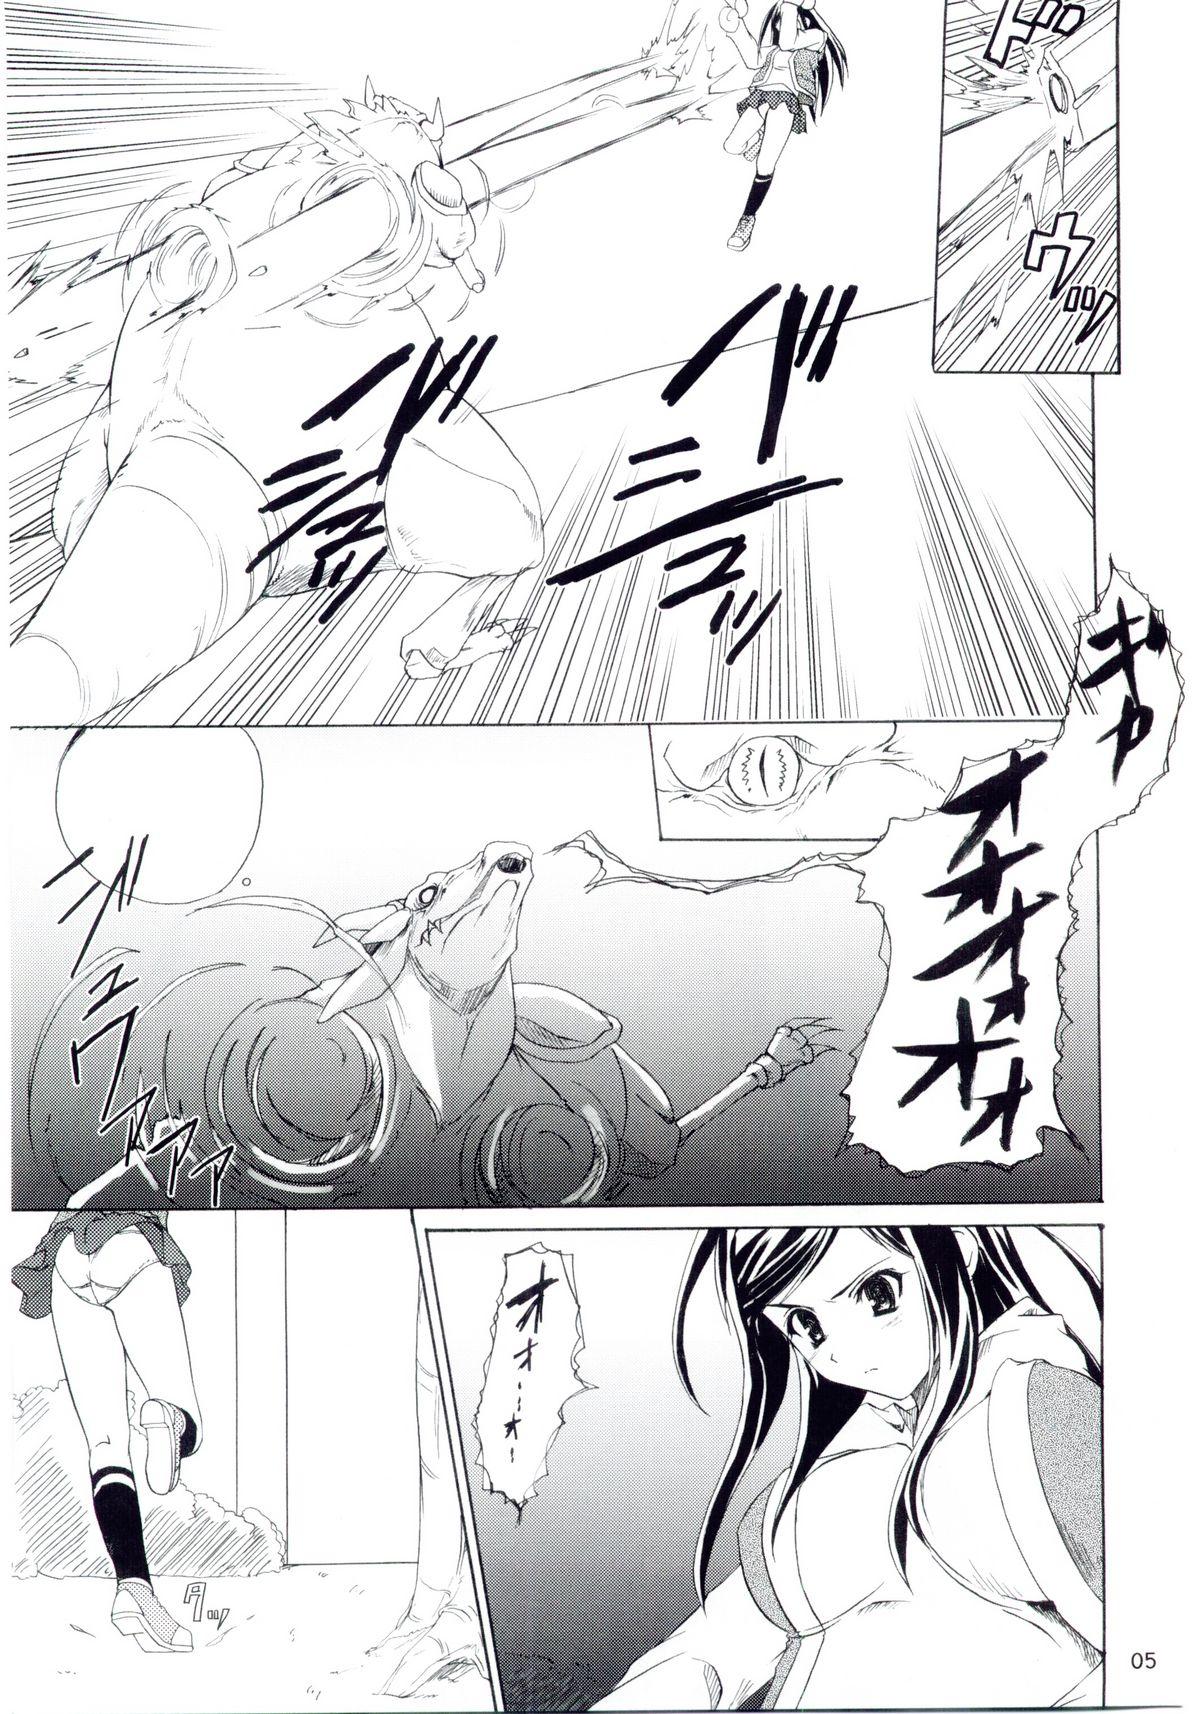 Best Blow Job Ever PRIDE - Mai hime Creampies - Page 4